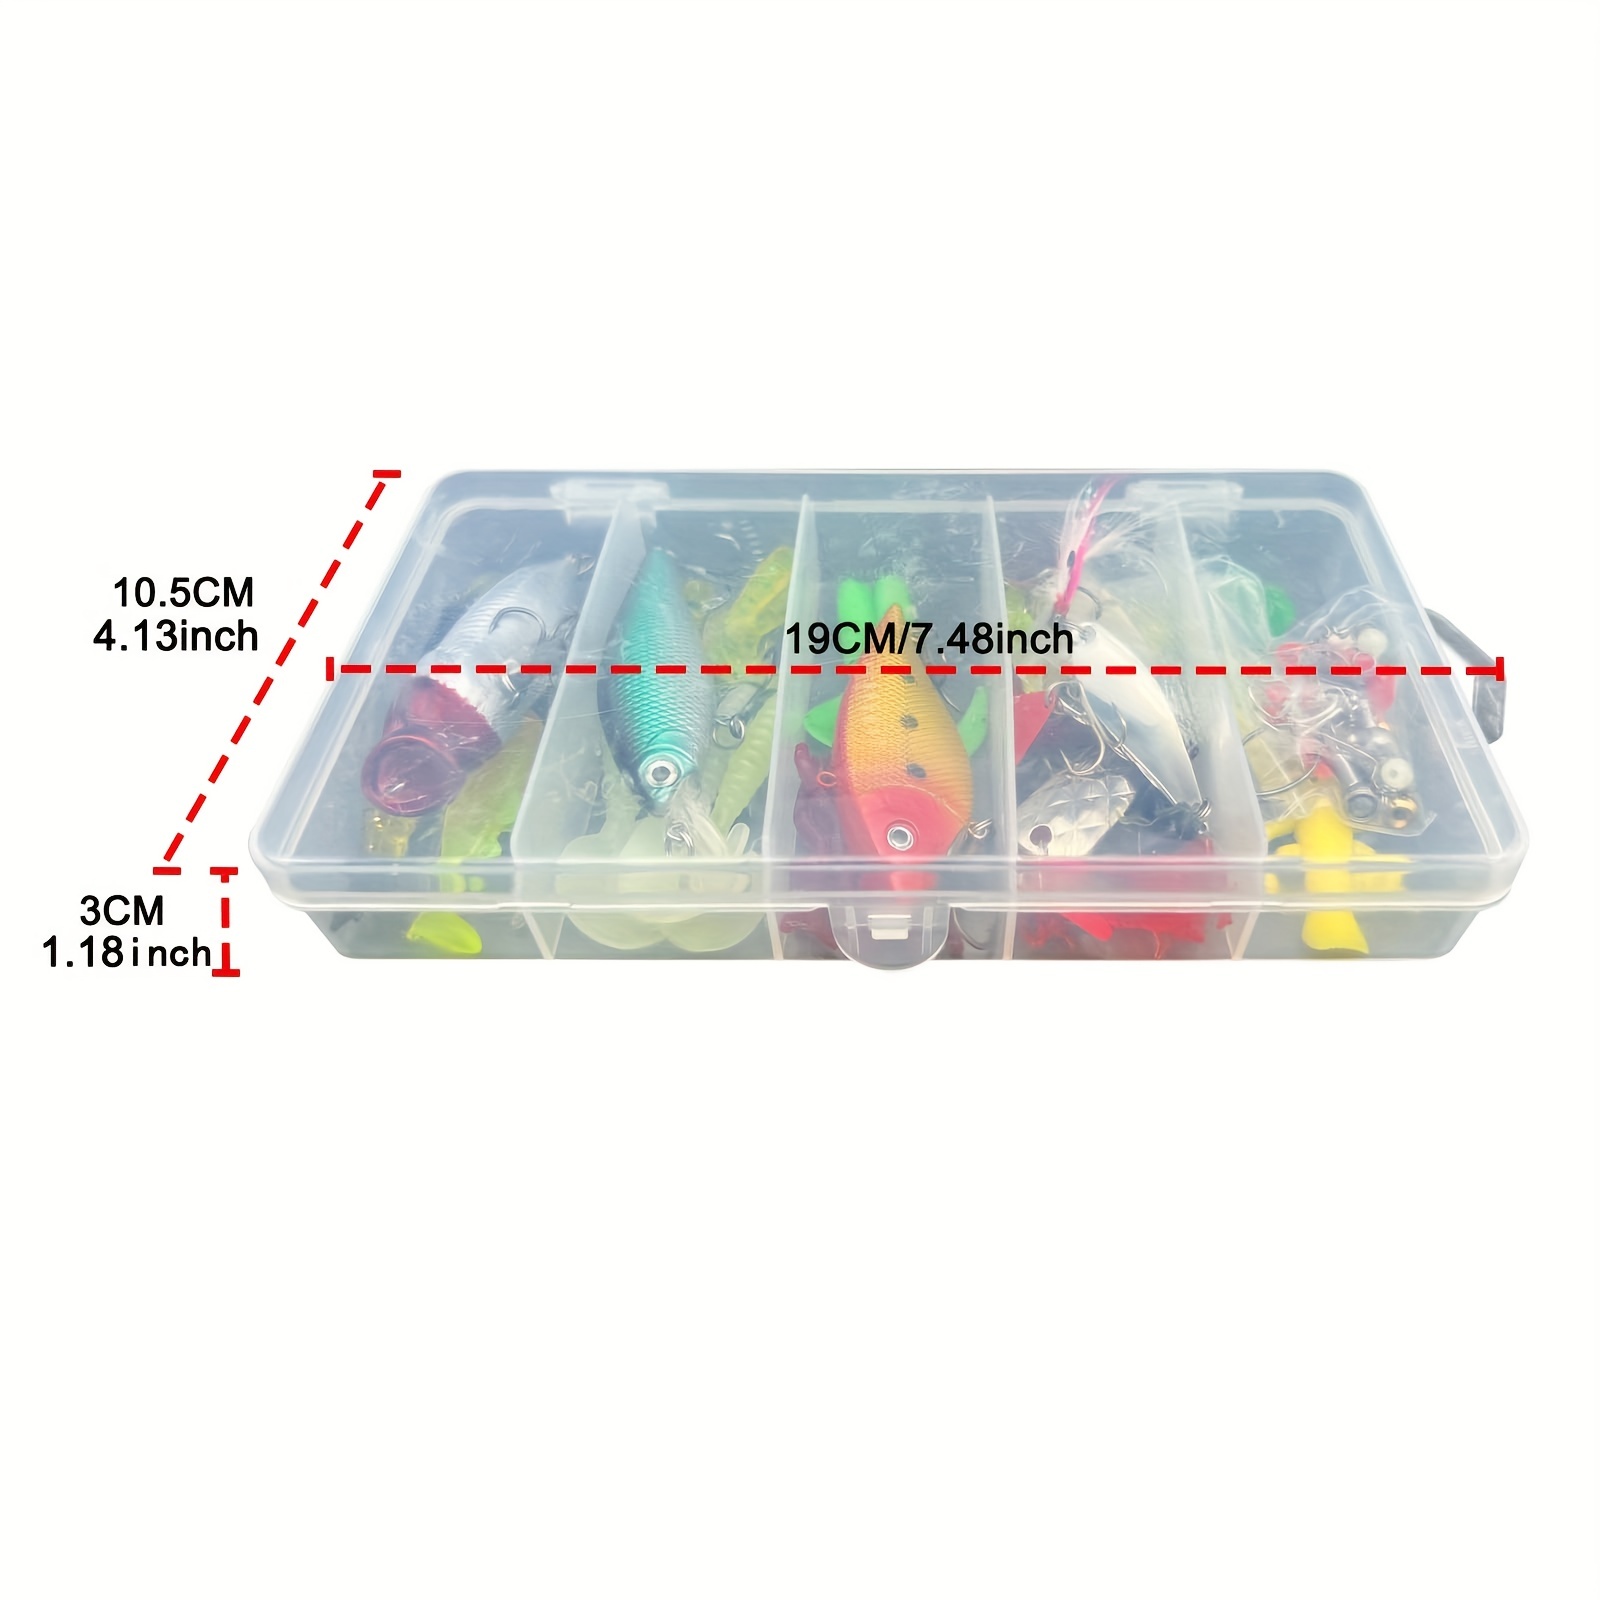 Peggybuy 20pcs Fishing Lures Sequin Spoon Baits Set With Zipper Tackle Storage Bag Other